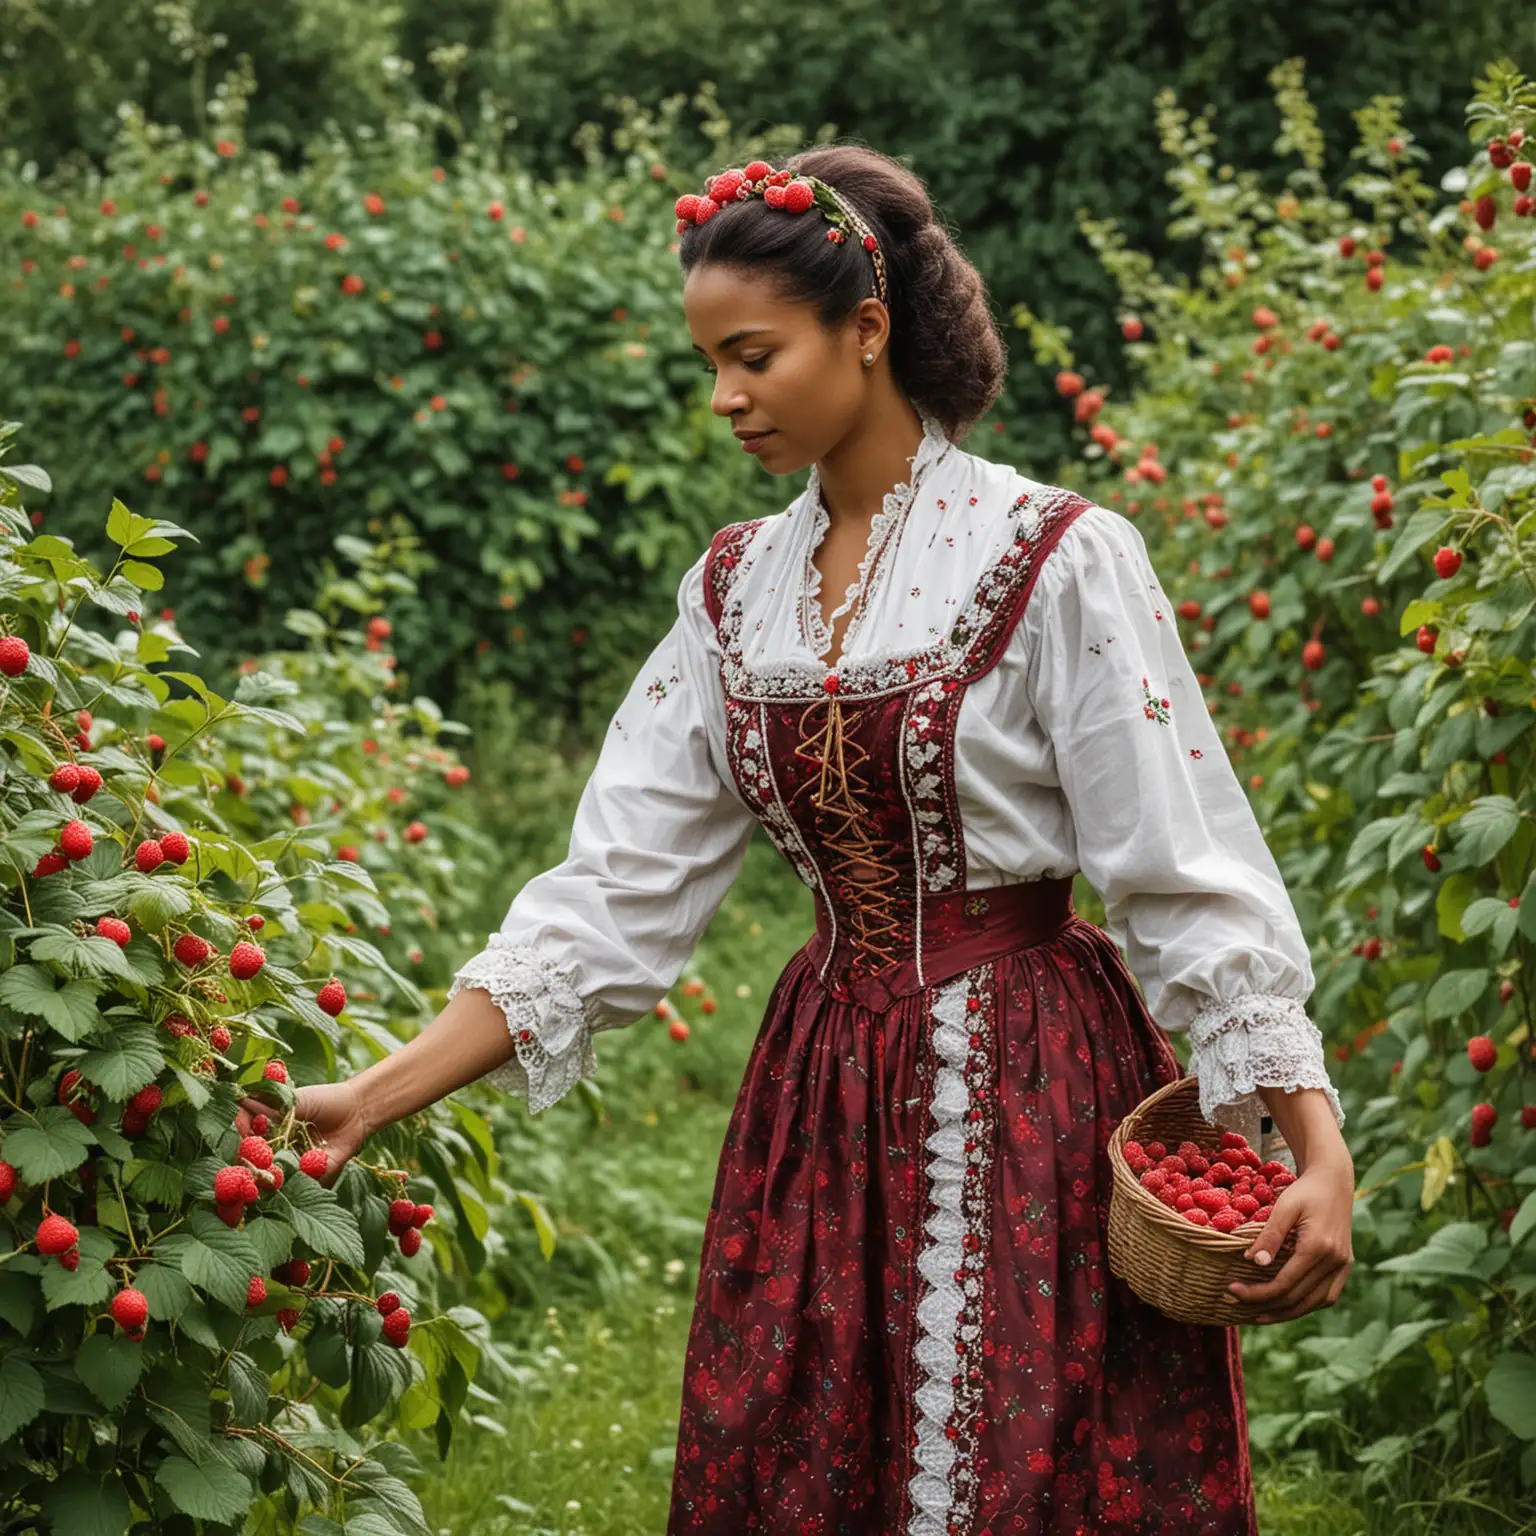 Russian-Woman-in-Traditional-Costume-Picking-Raspberries